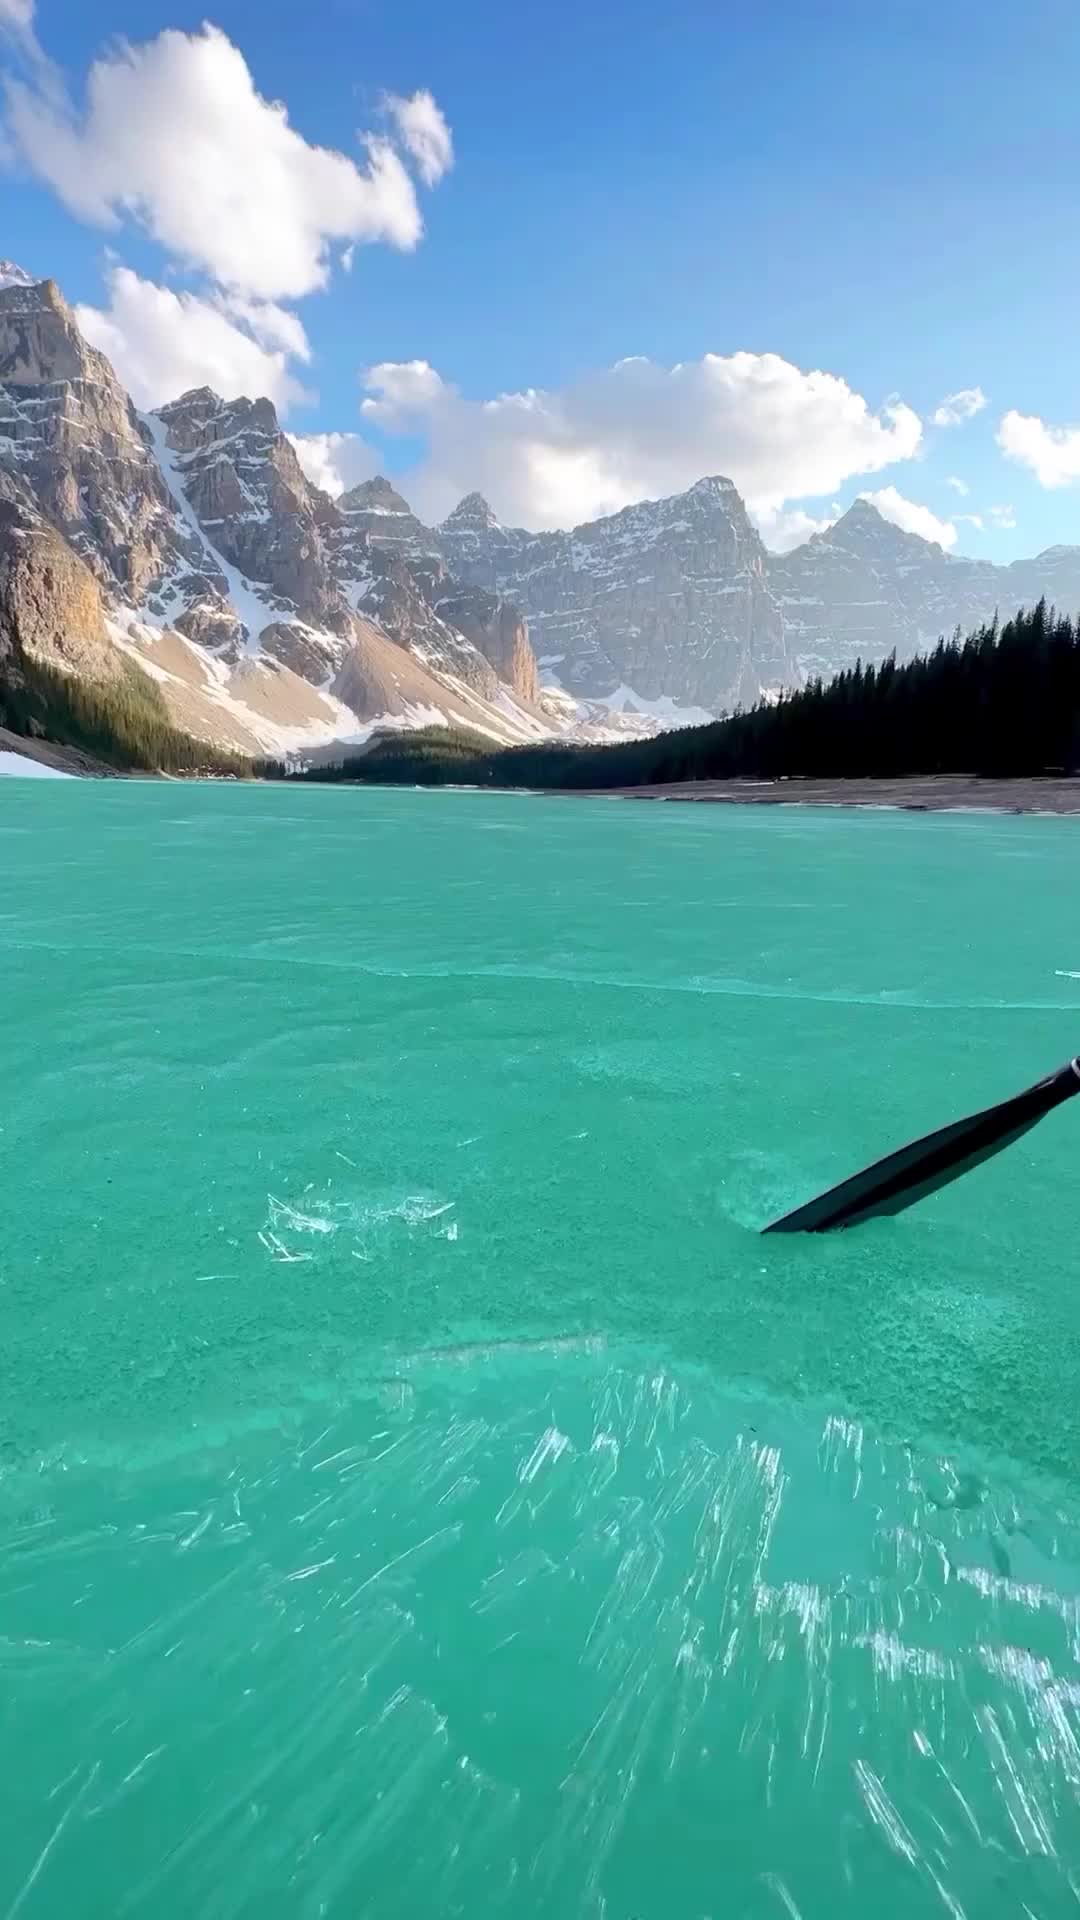 Canoeing Through Candle Ice in Banff National Park